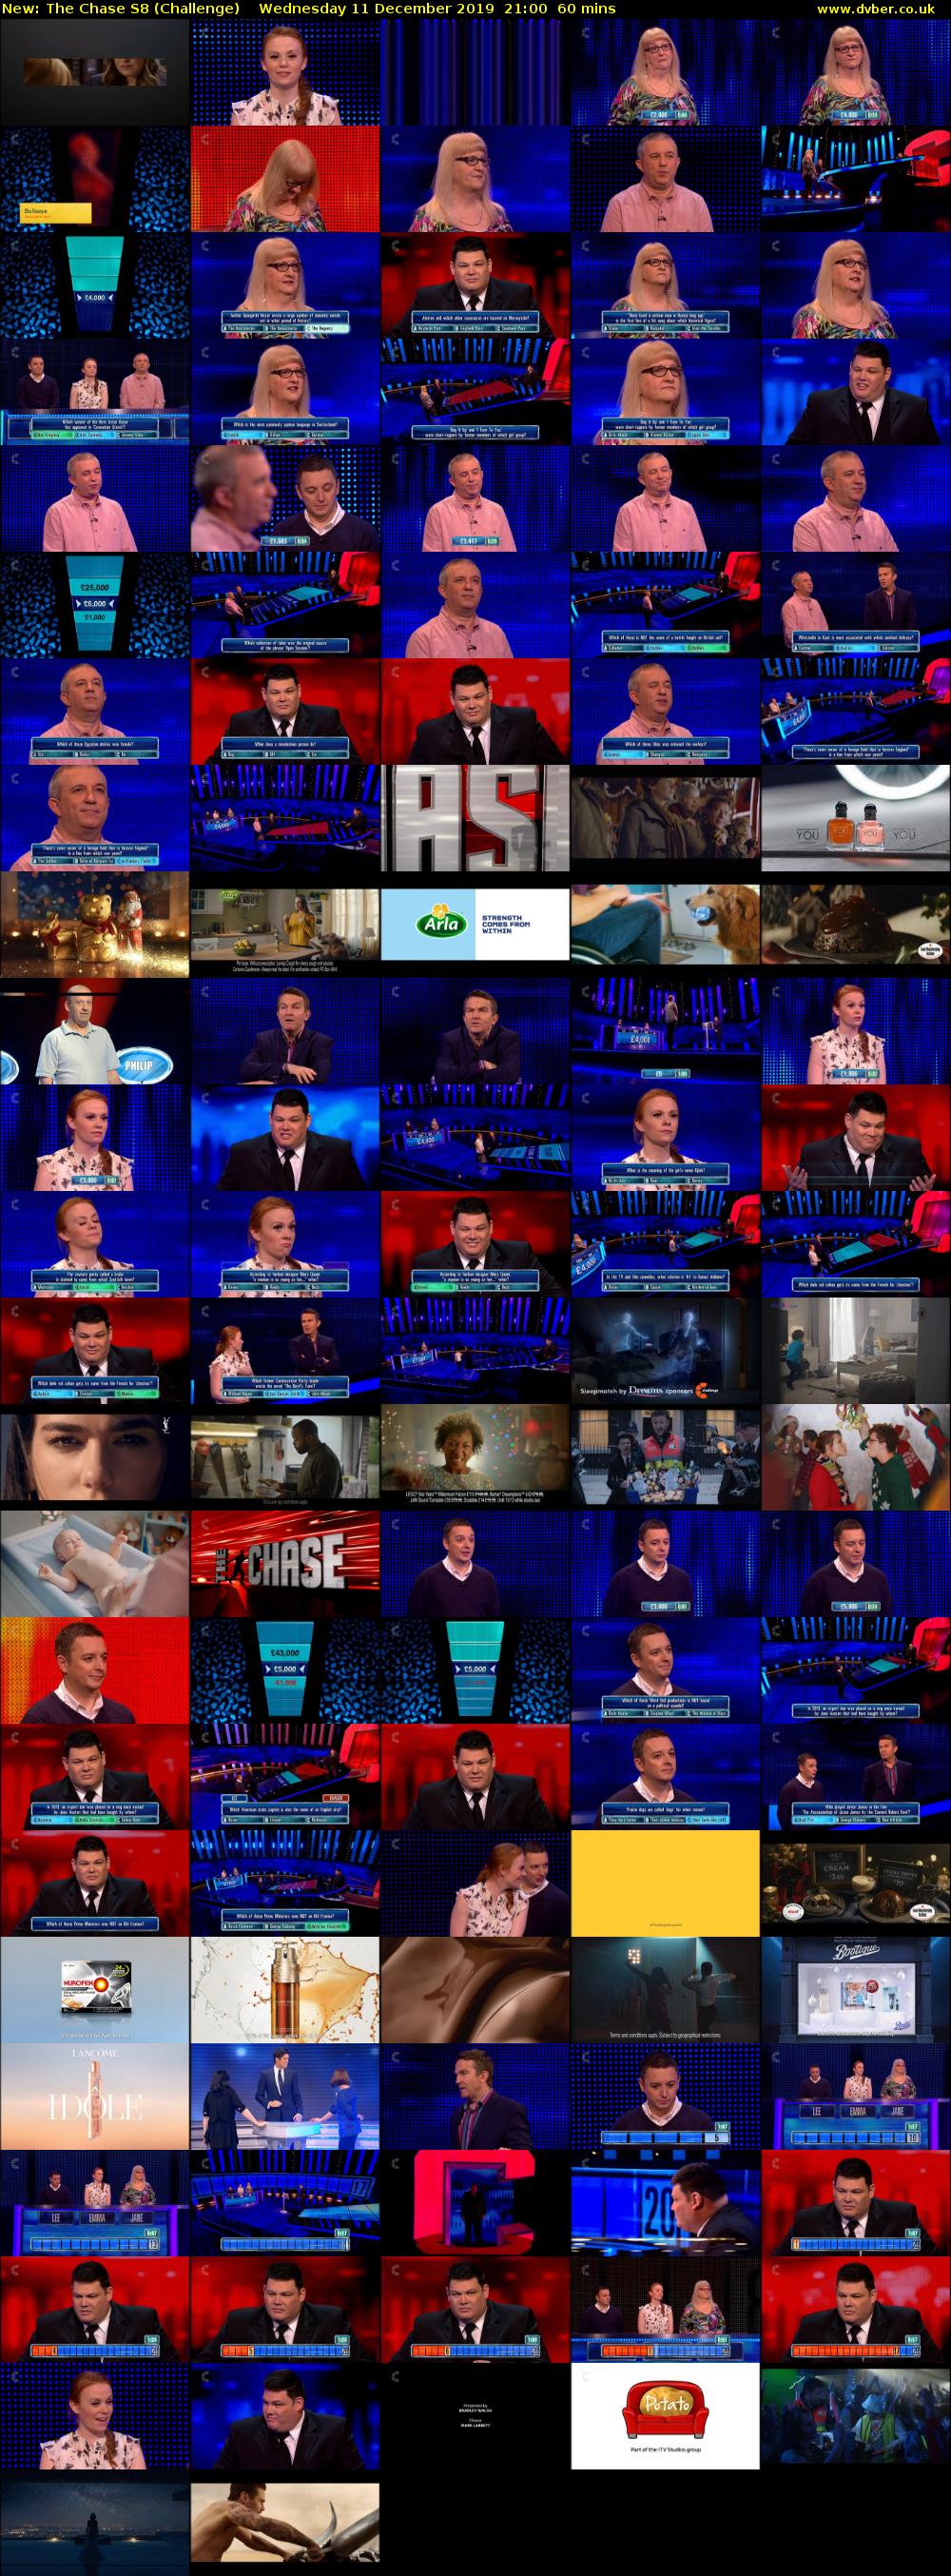 The Chase S8 (Challenge) Wednesday 11 December 2019 21:00 - 22:00